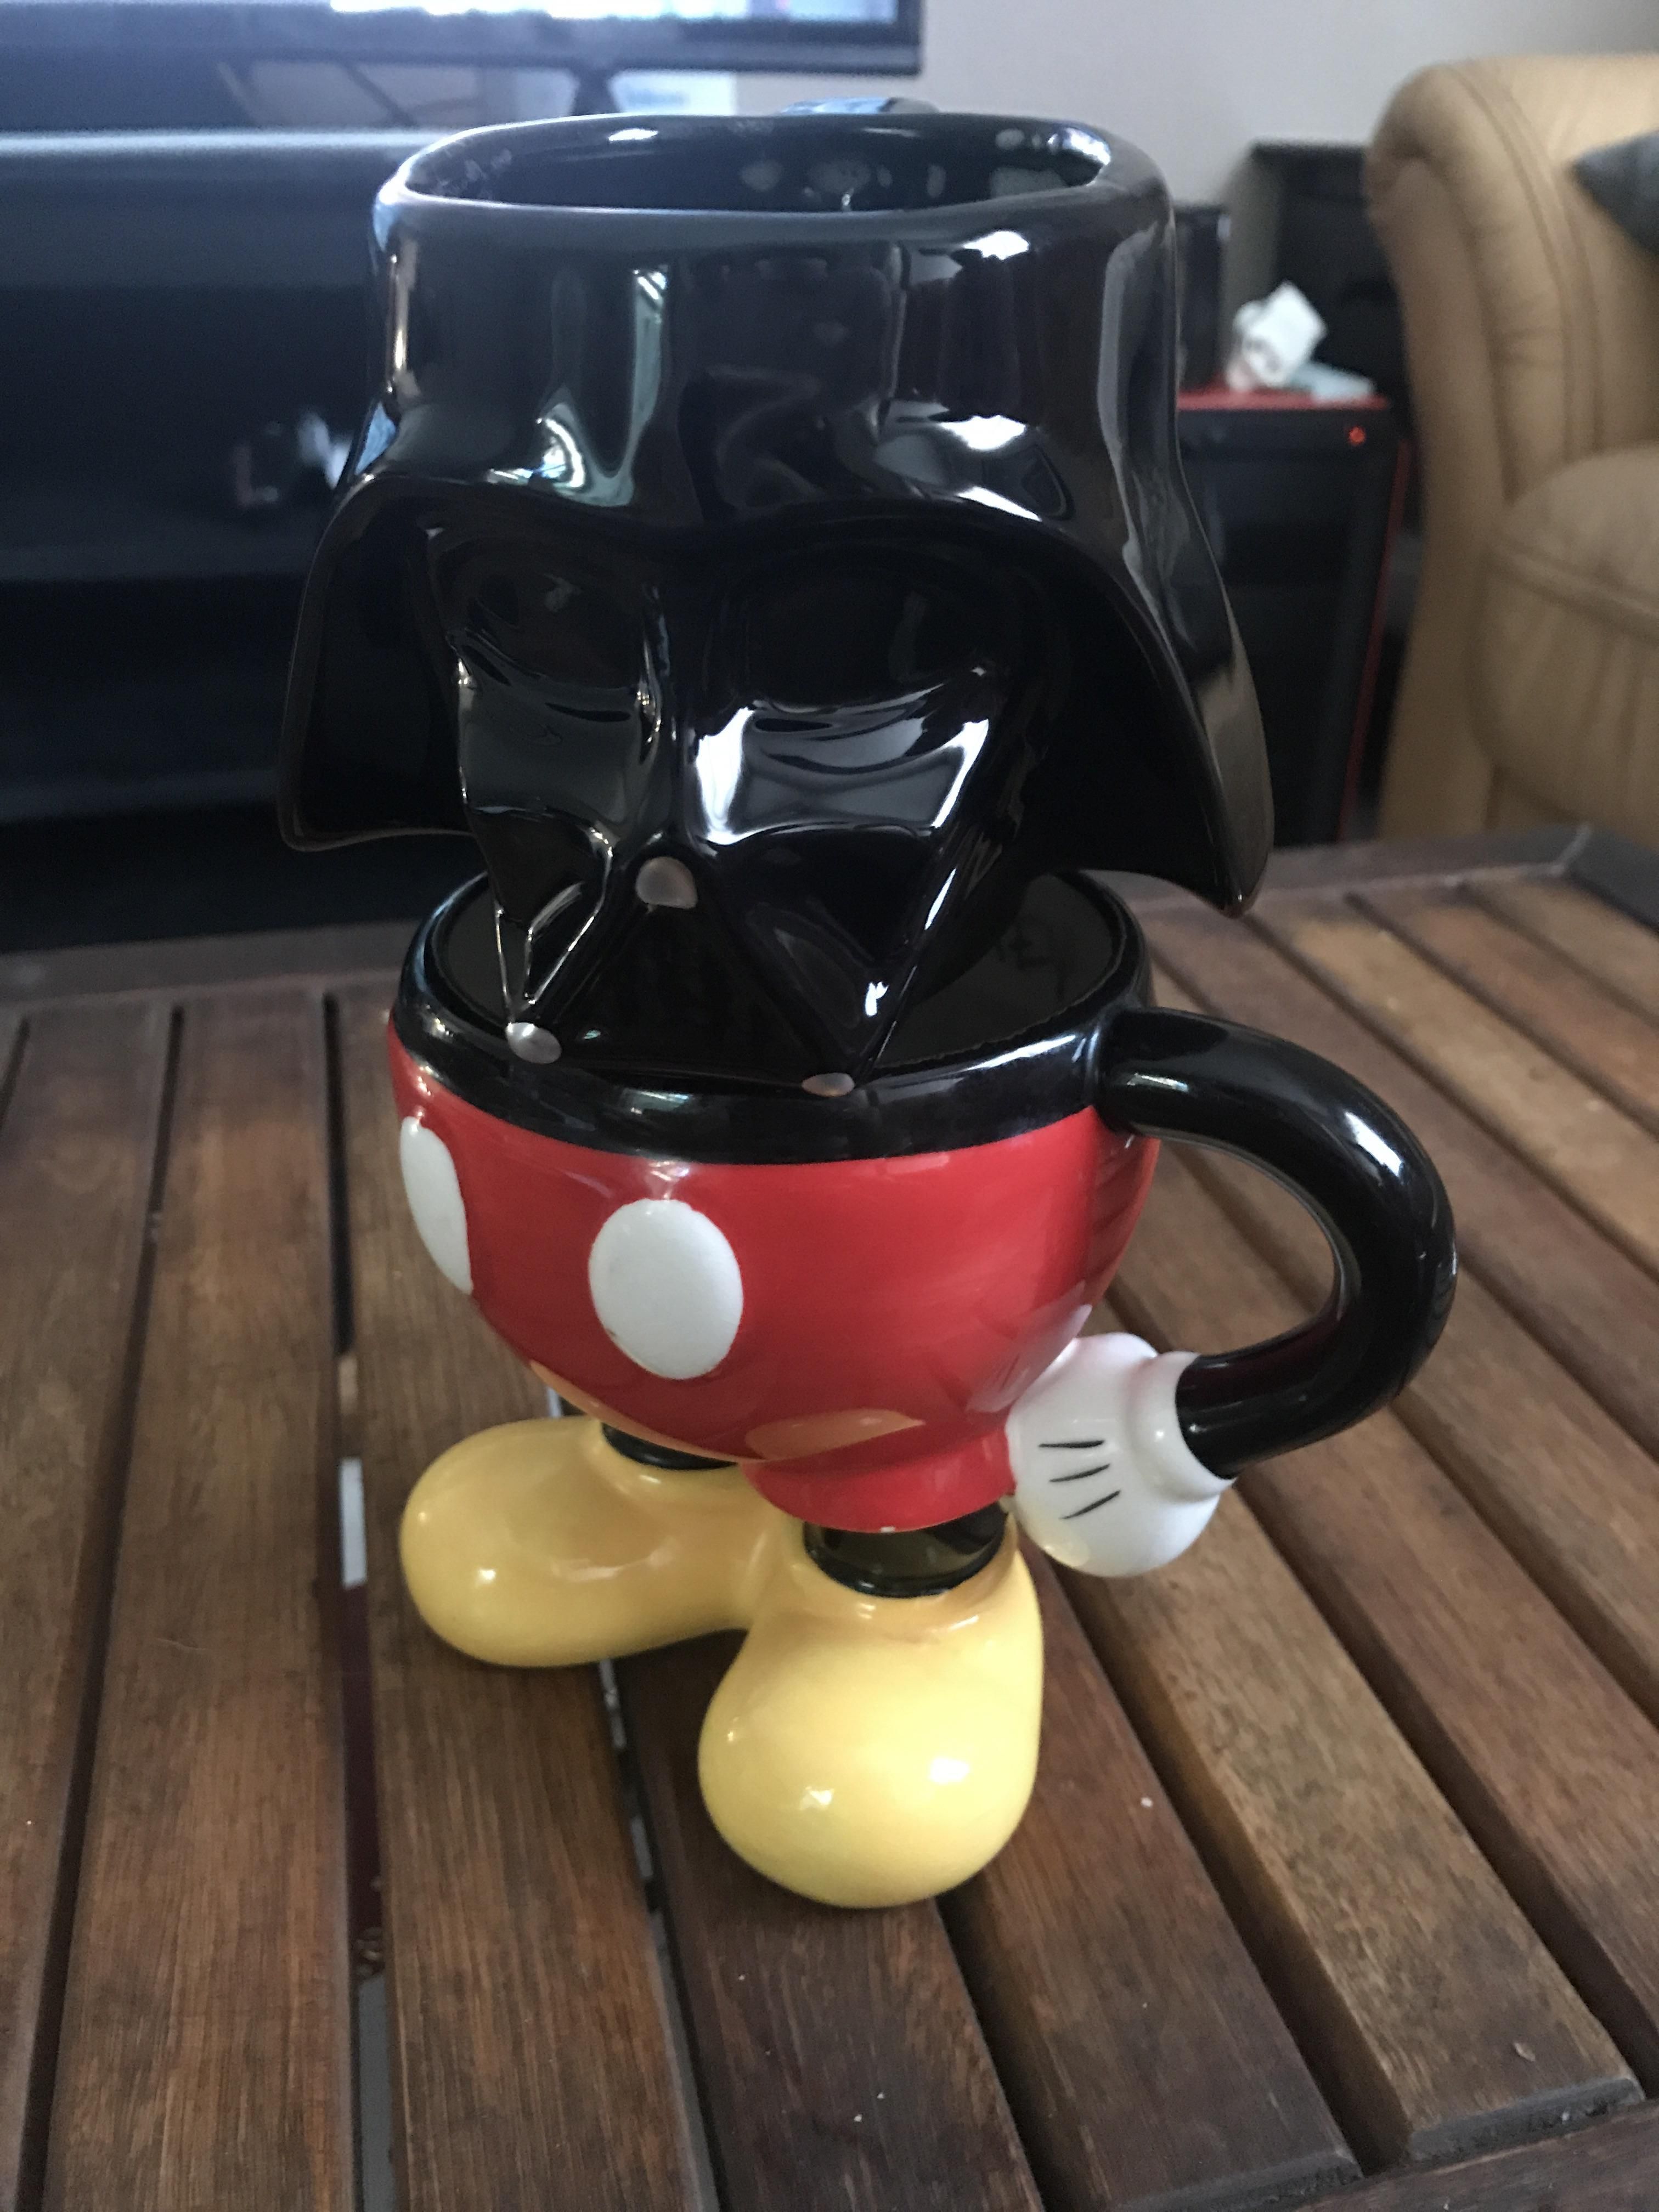 I'm a Star Wars fan, and my wife a Disney fan. She had an idea to stack our novelty cups.